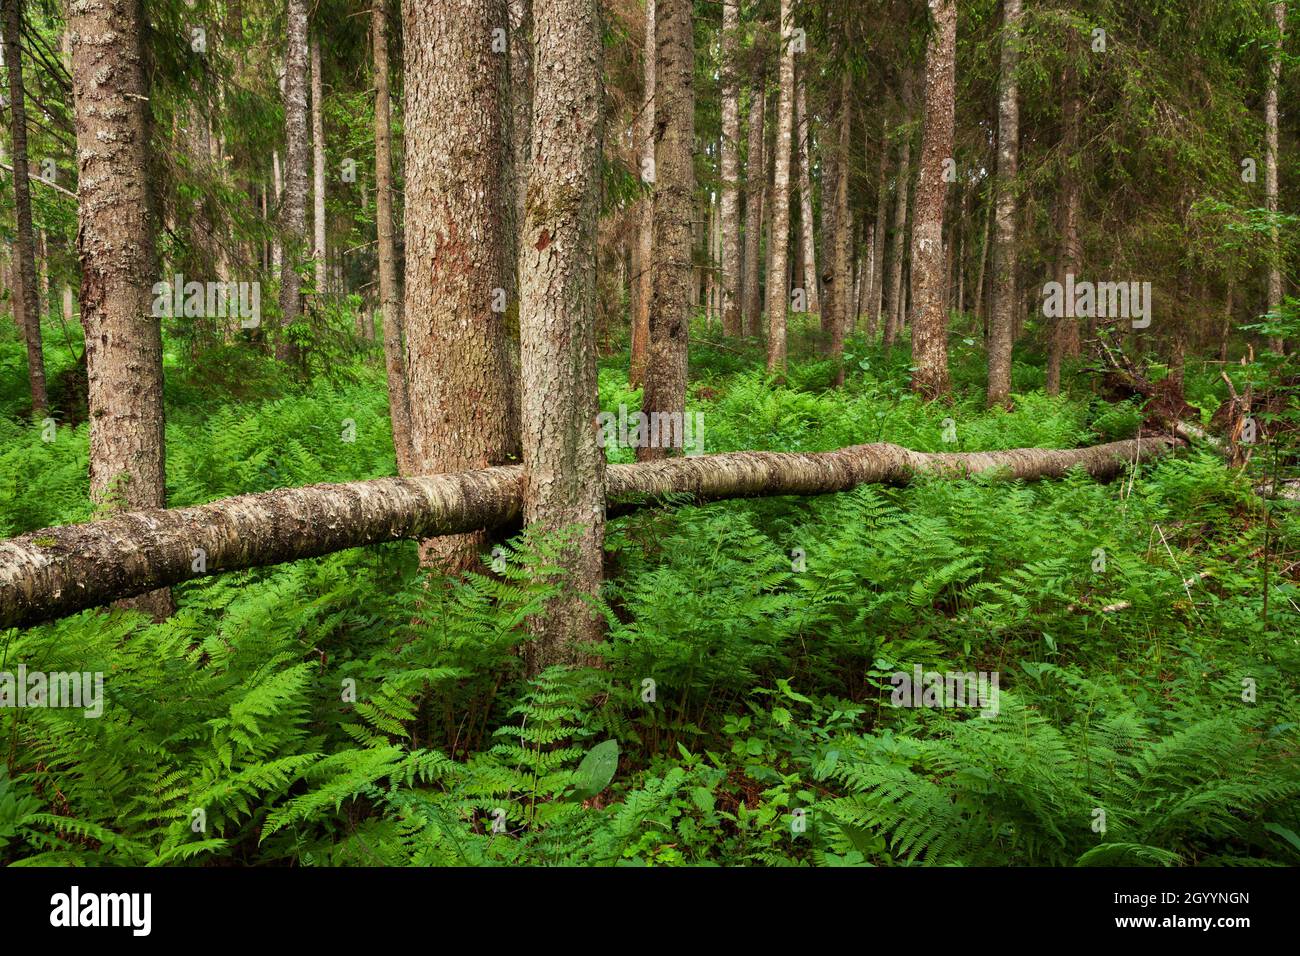 A lush and green Estonian old-growth forest with decaying and old trees during a summer evening. Stock Photo